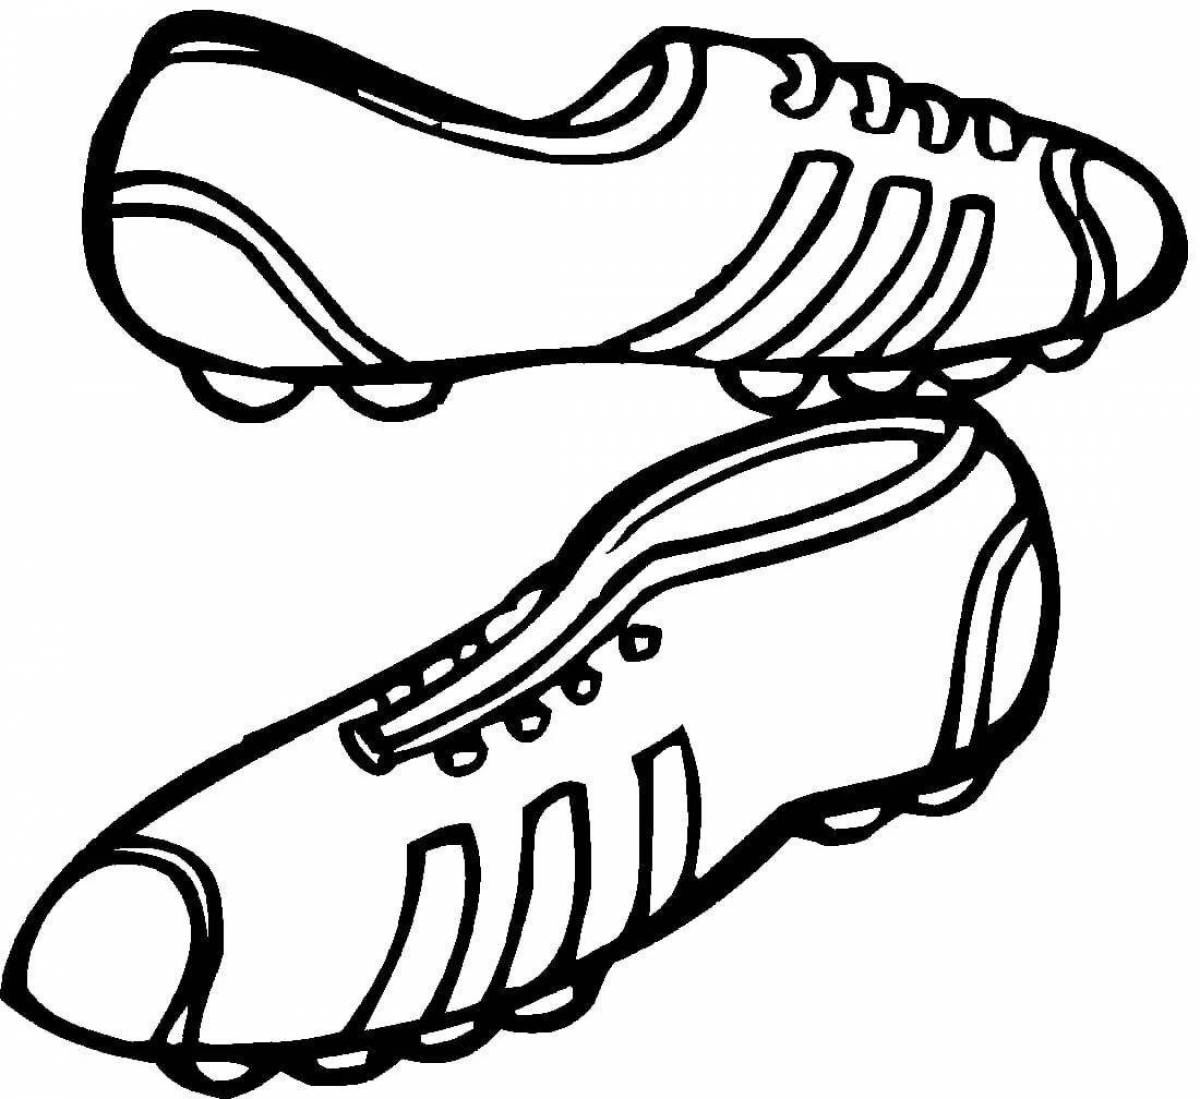 Colourful shoes coloring page